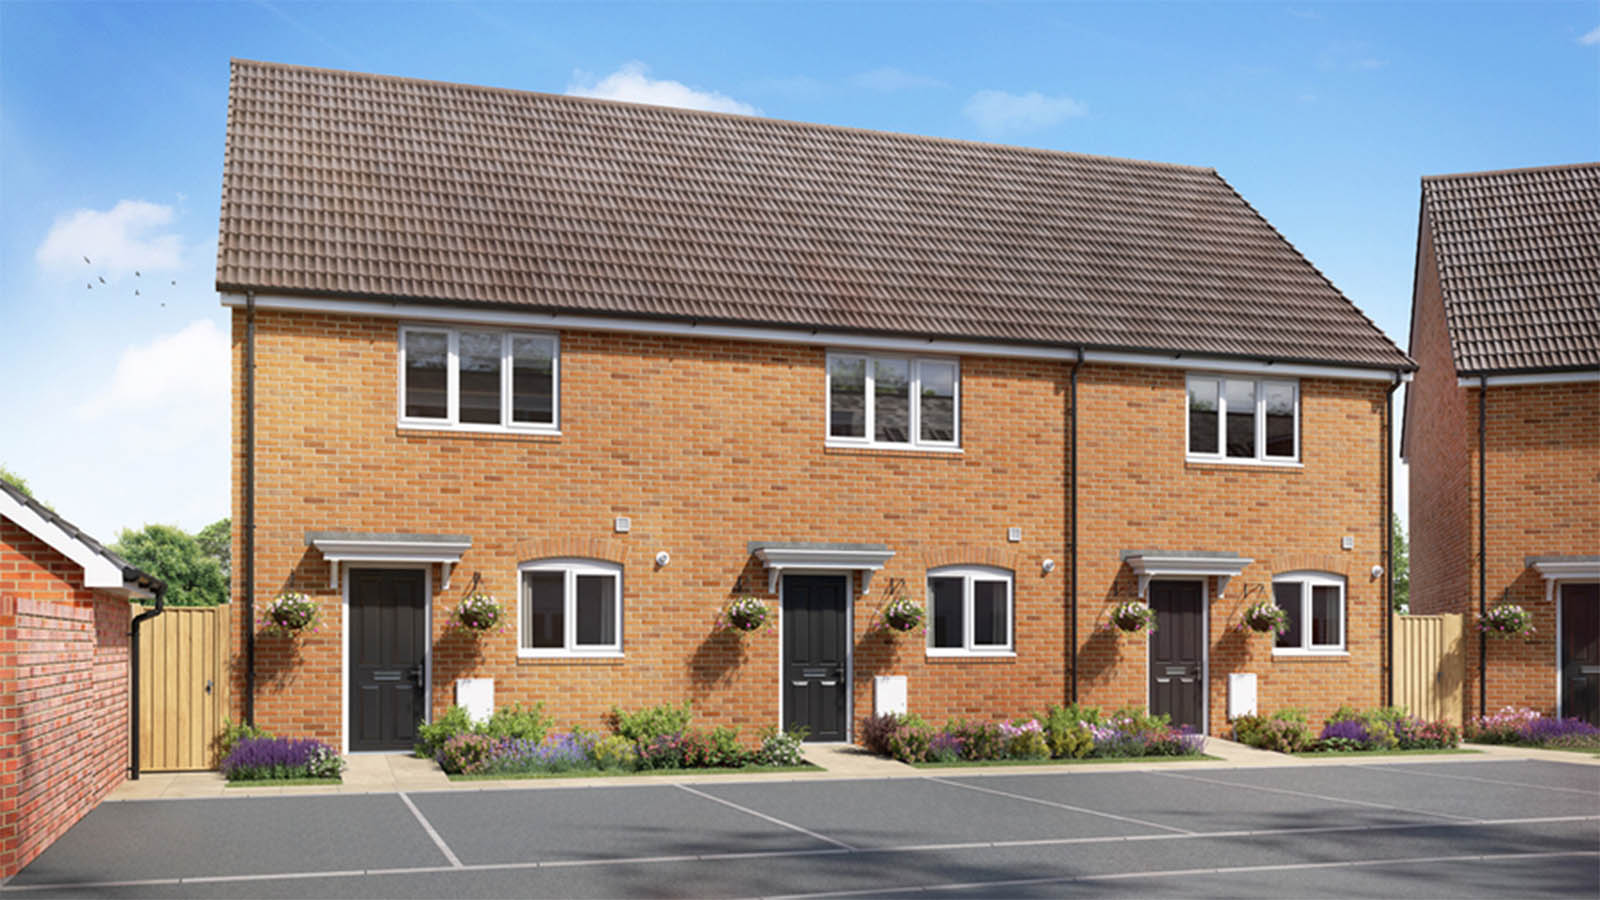 Two-bedroom homes from Bromford at Great Oldbury